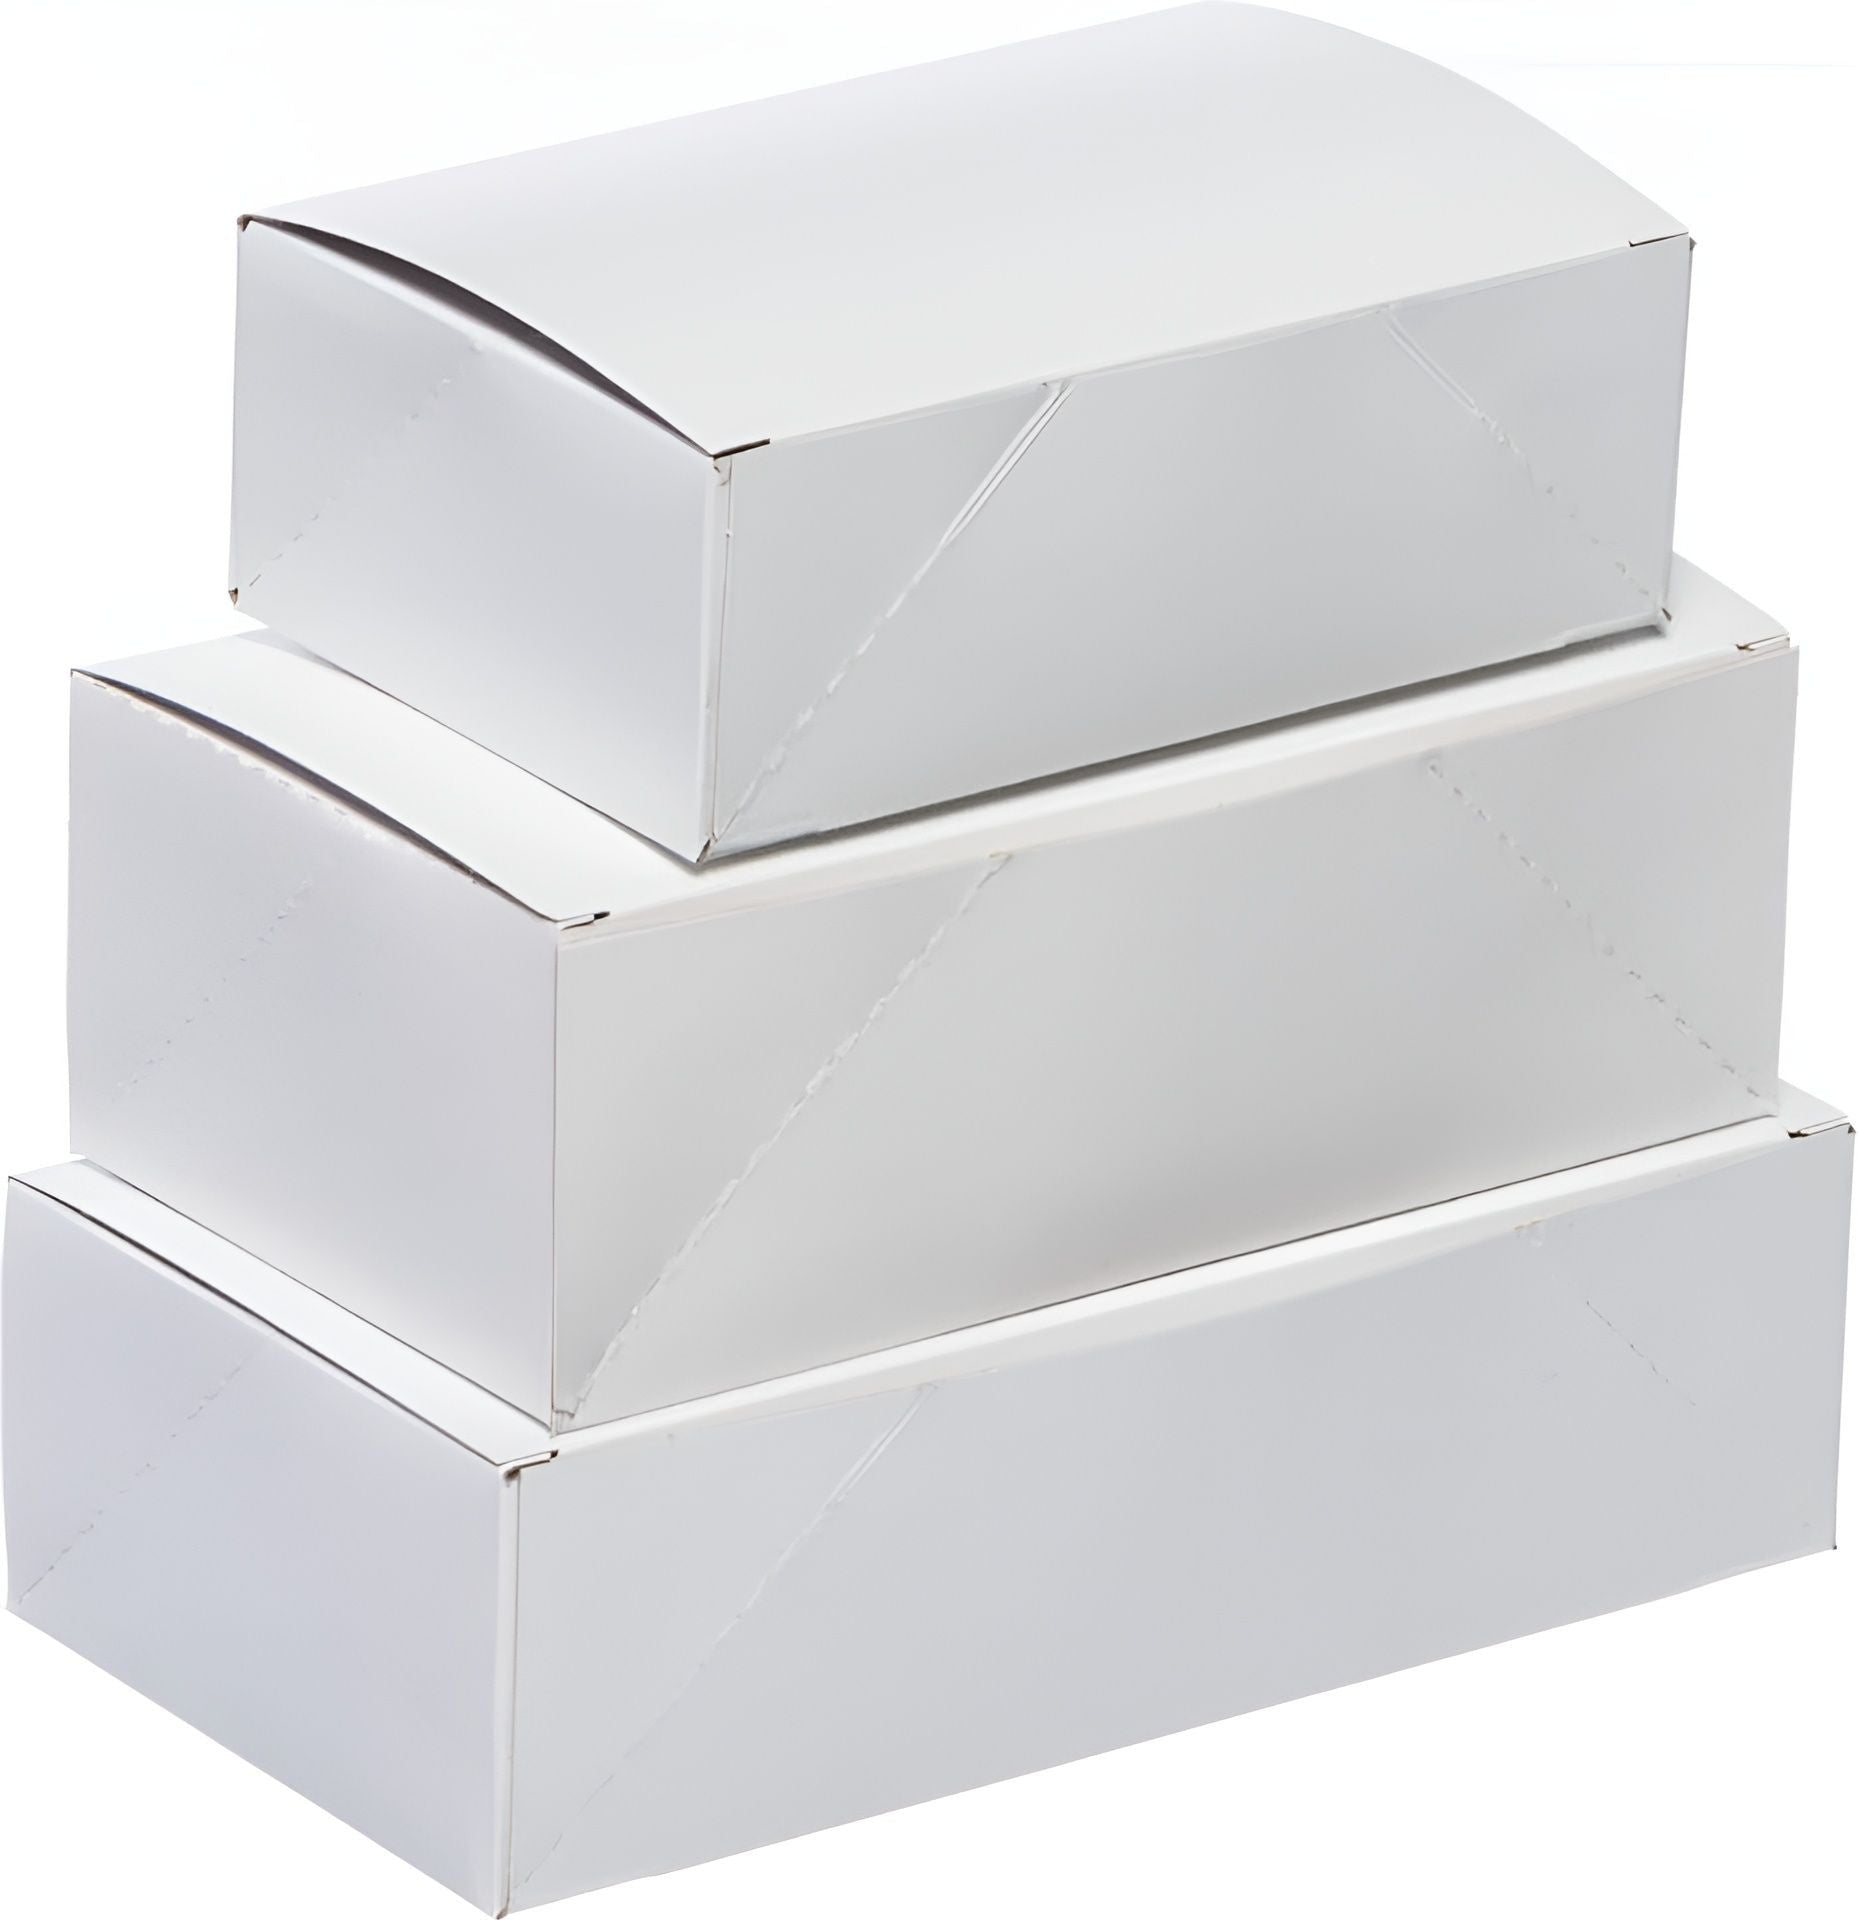 EB Box - 9.25" x 5" x 2.75" White Plain Dinner Carton Greaseproof Food Containers, 250/bn - 105520